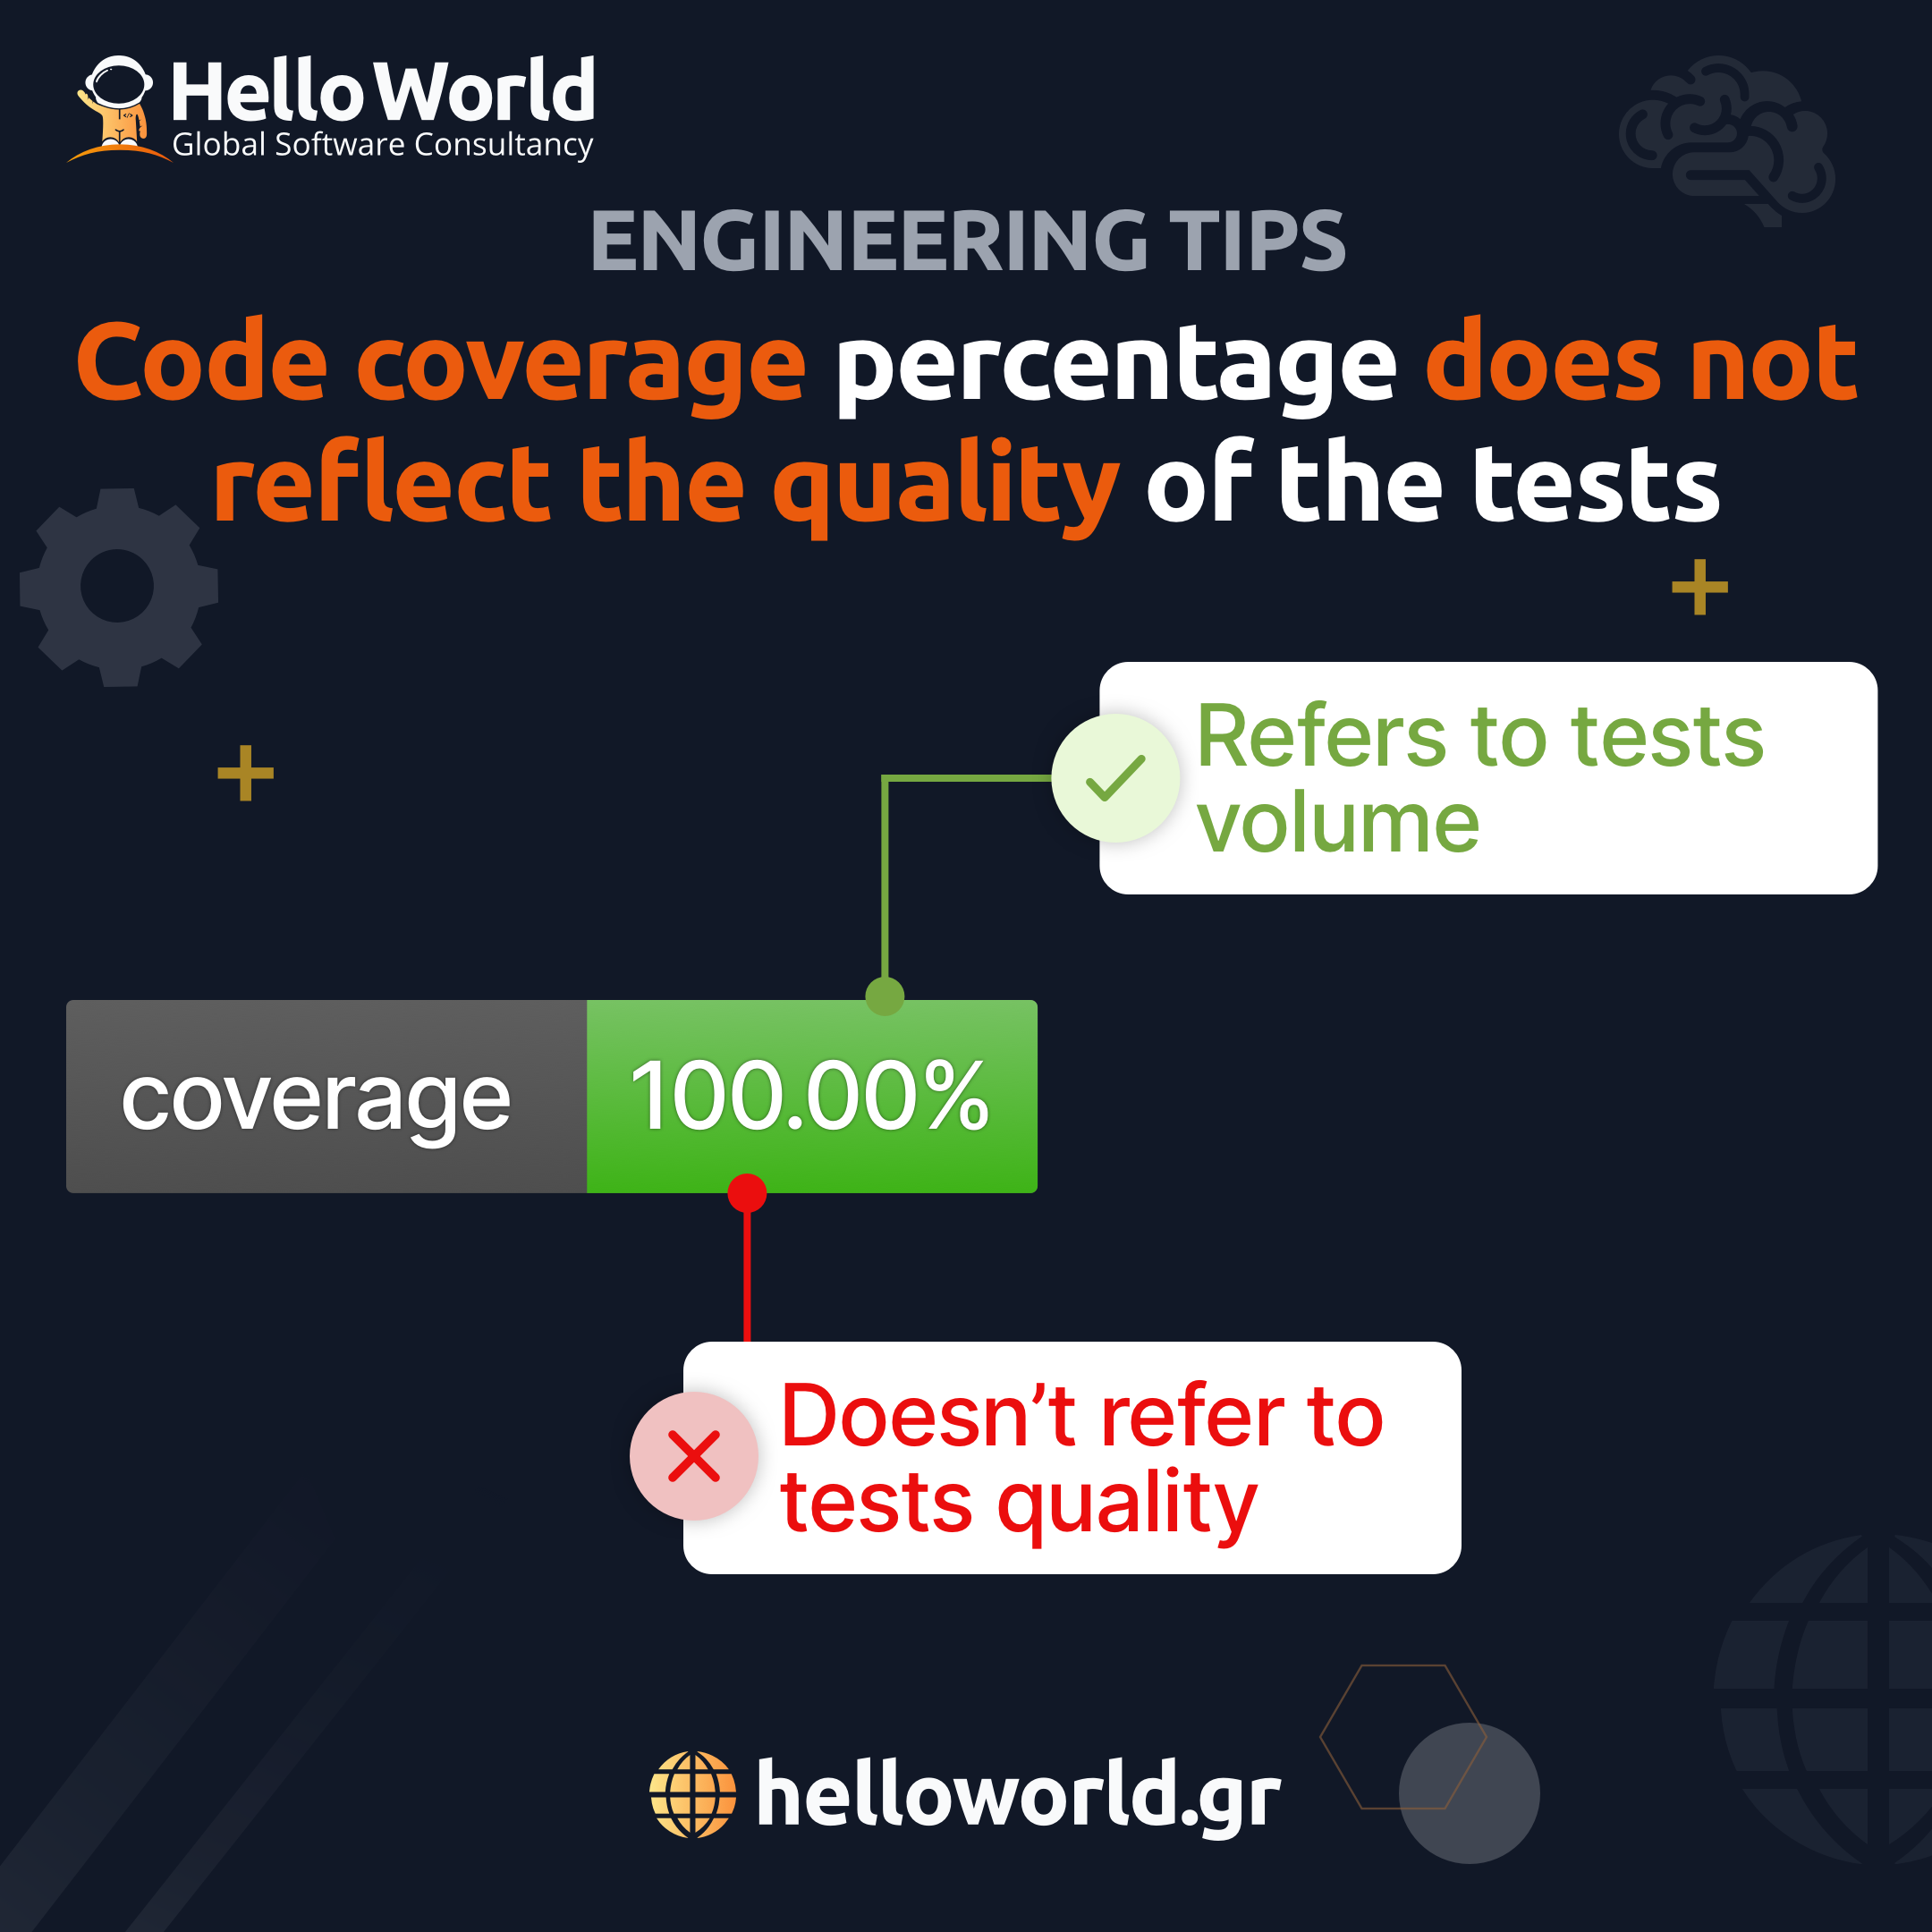 Code coverage percentage does not reflect the quality of the tests